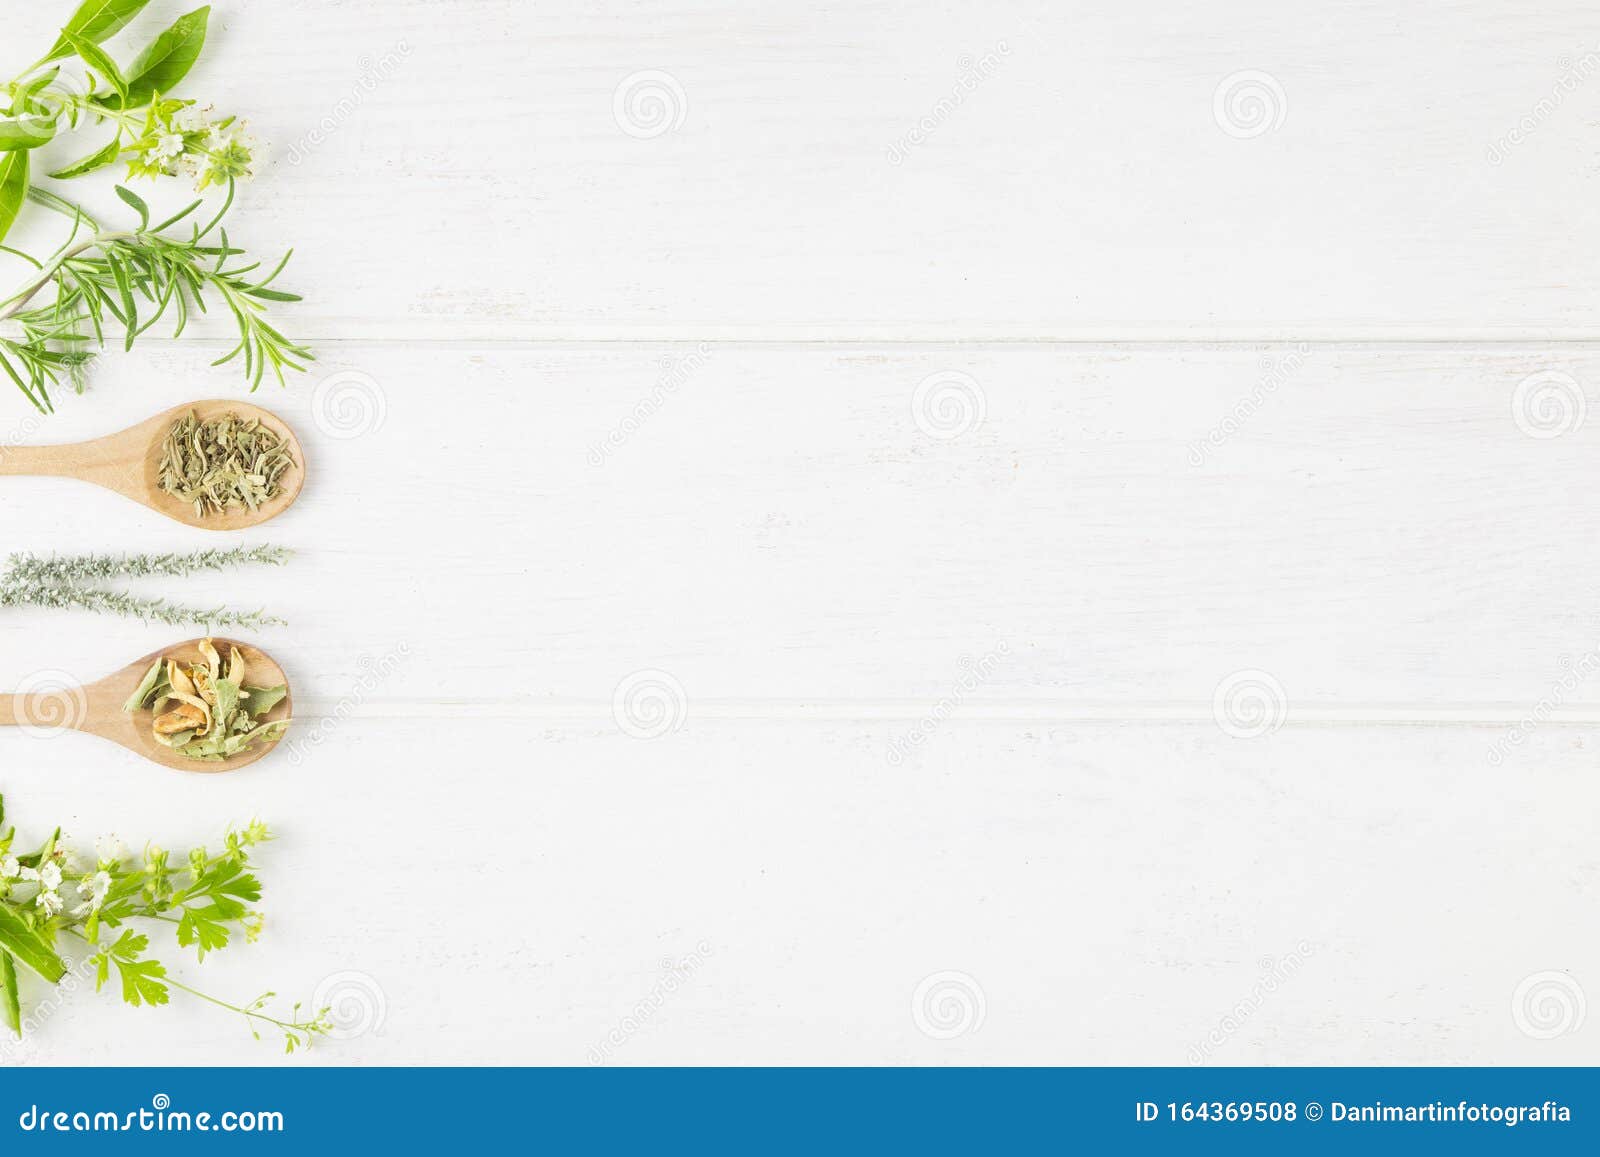 Medicinal Herbs on White Background. Top View Stock Photo - Image of ...